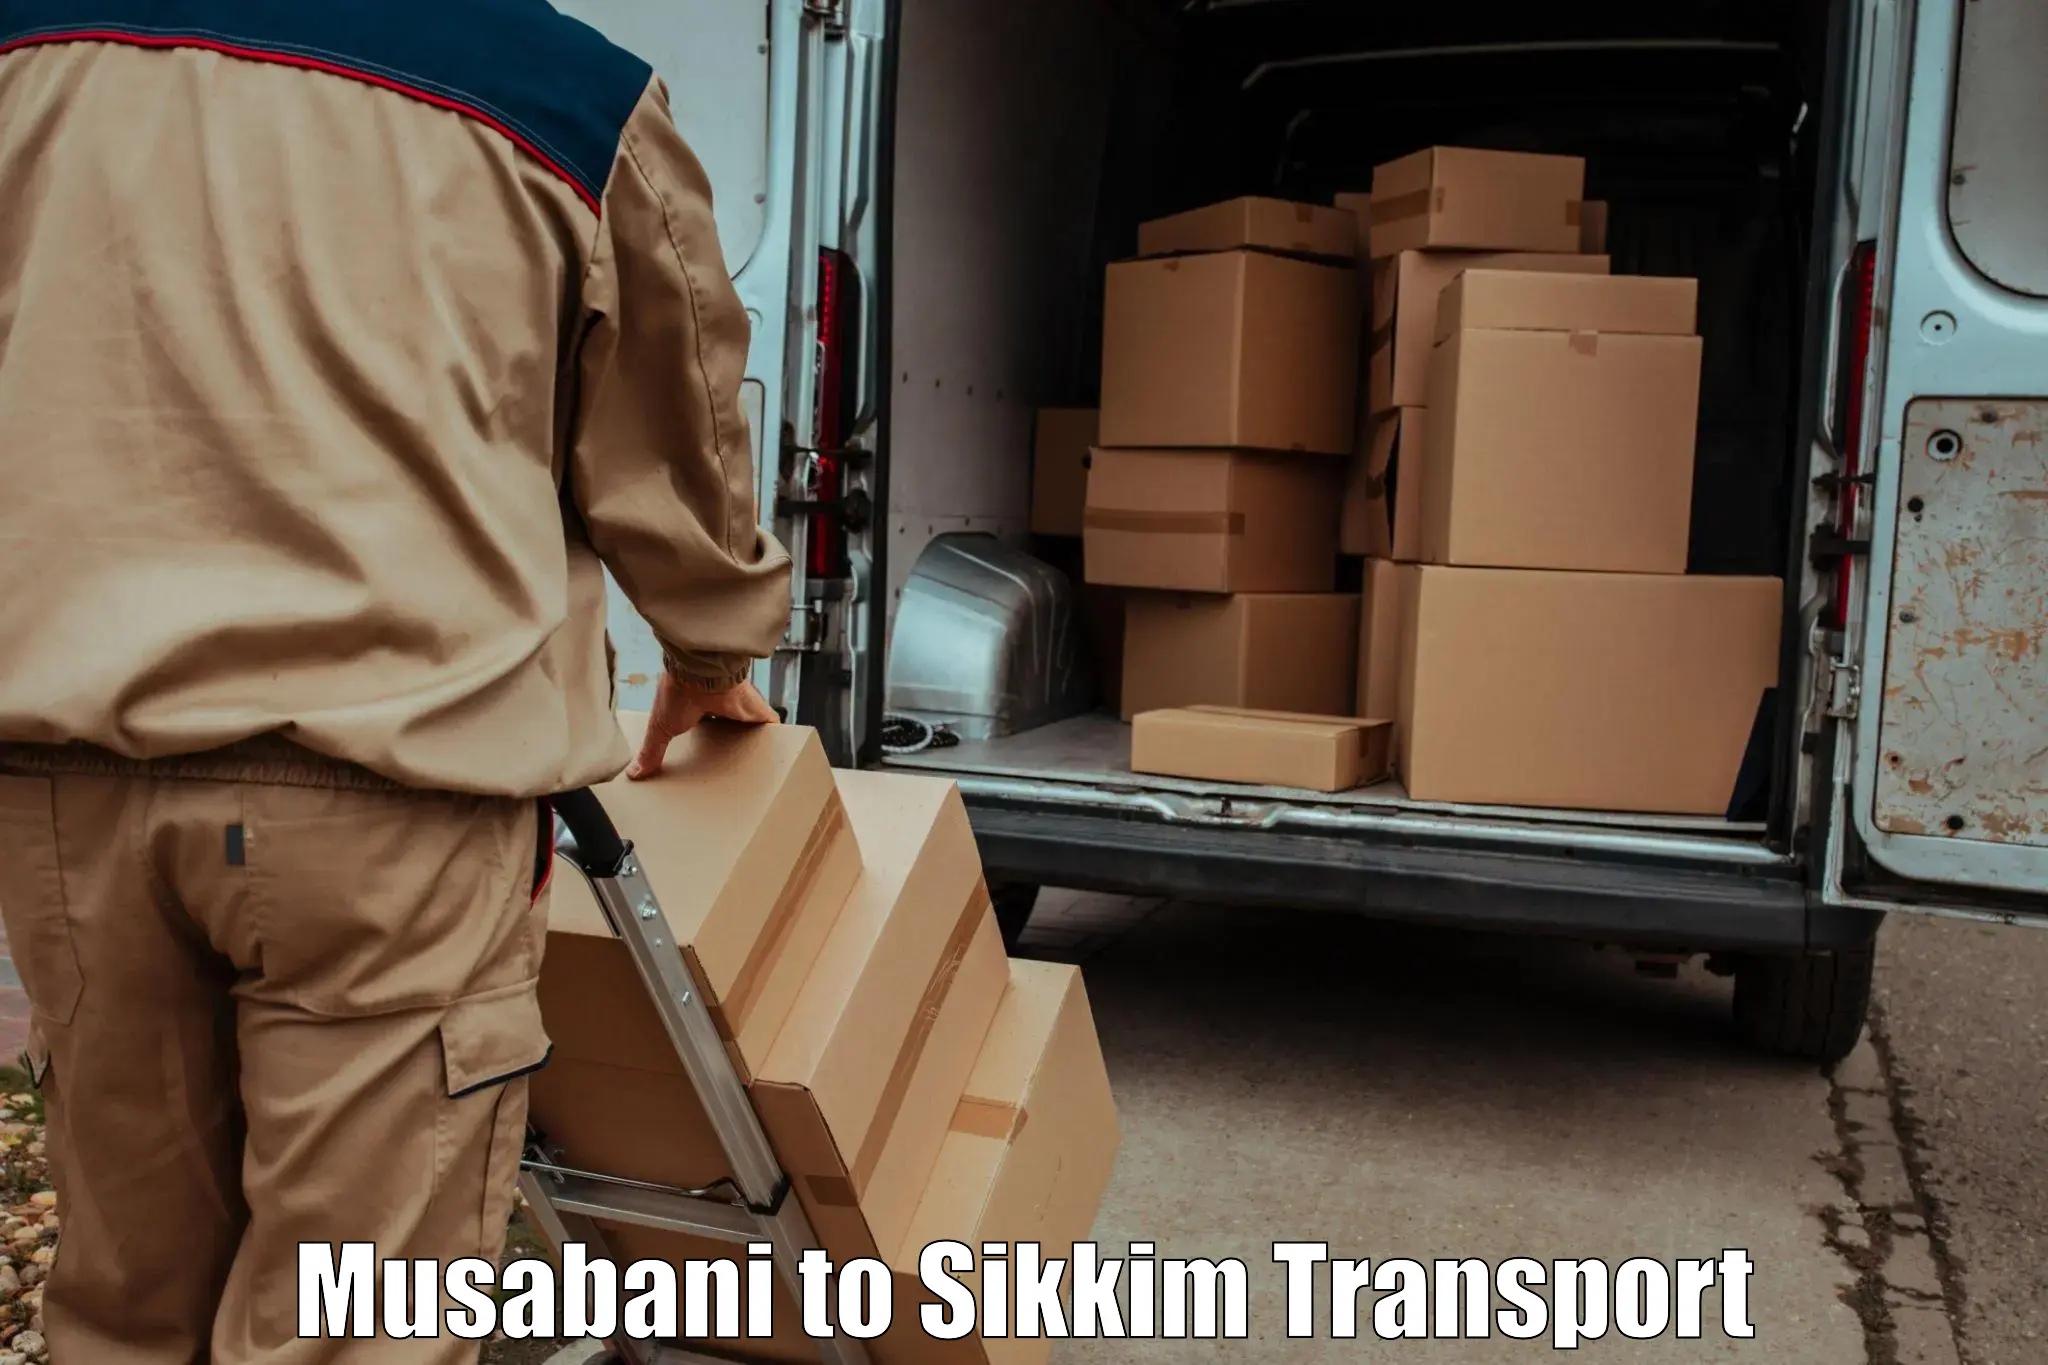 Container transport service Musabani to Pelling